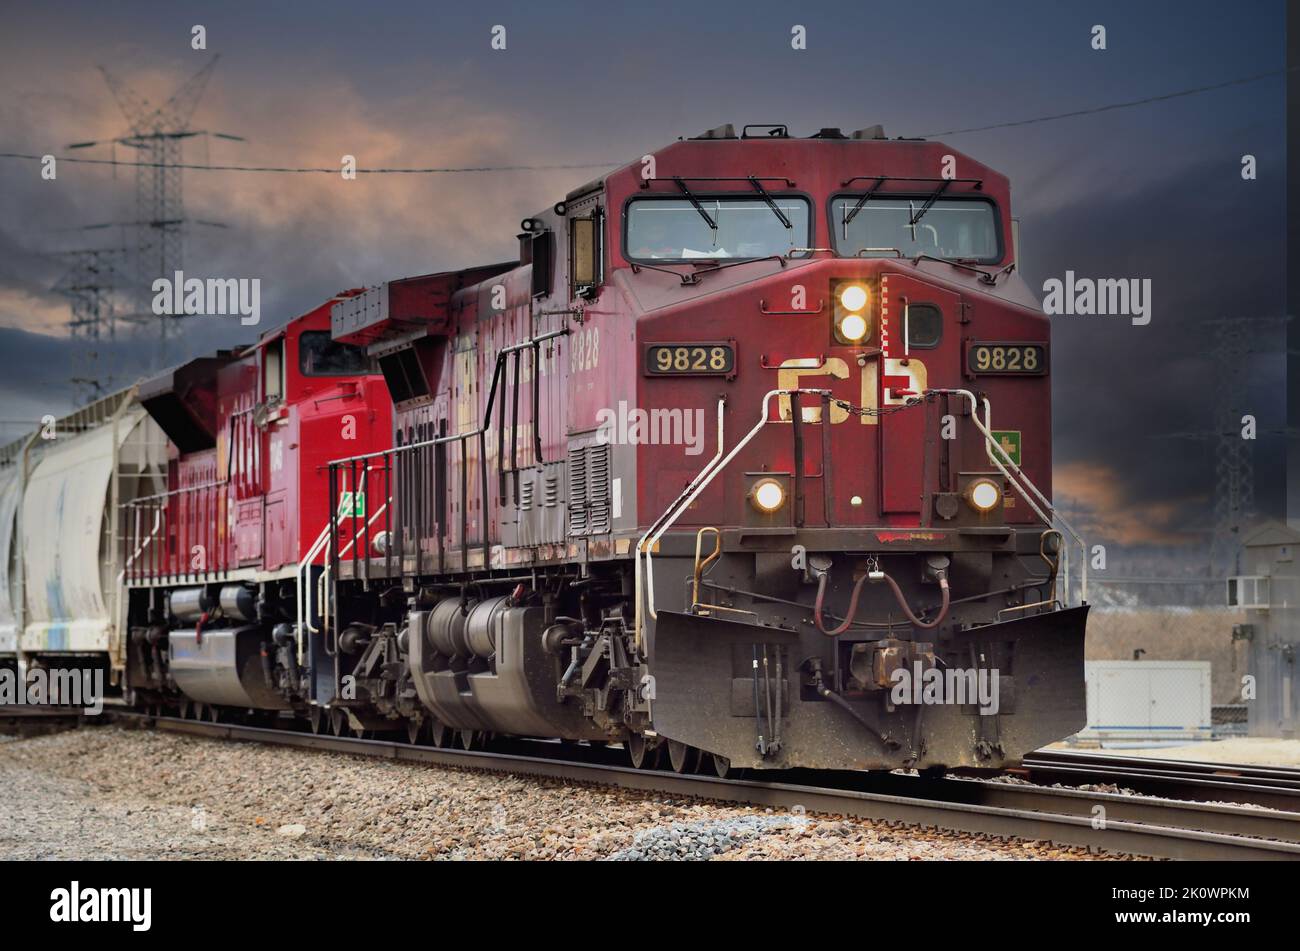 Bartlett, Illinois, USA. A pair of Canadian Pacific Railway locomotives lead a freight train eastbound through the Chicago suburbs. Stock Photo